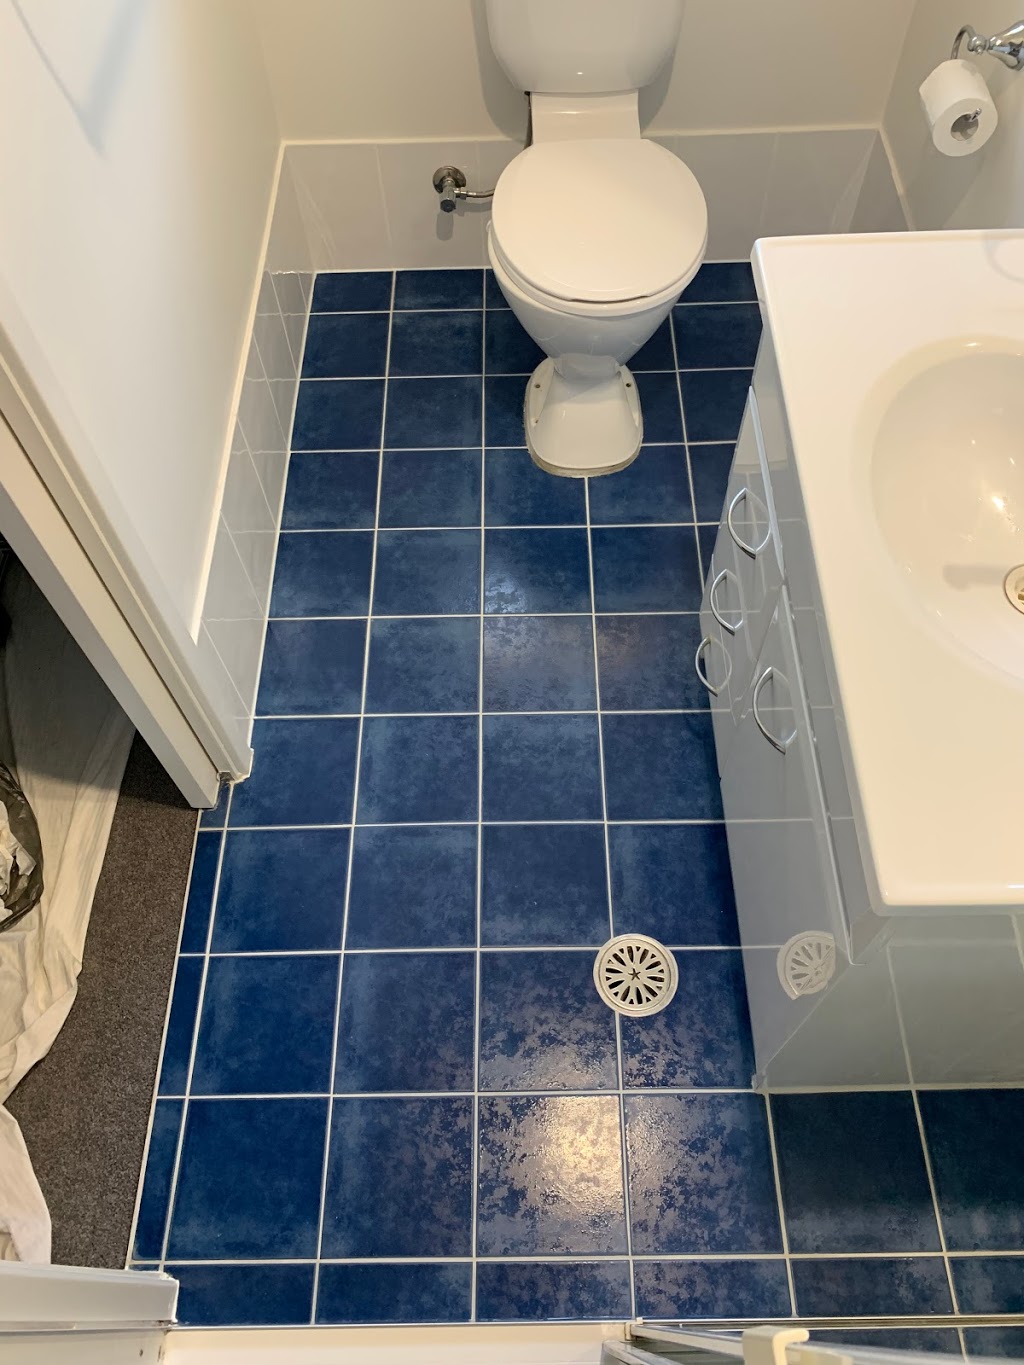 Affordable Regrouting - Regrouting - Tile Cleaning & Tile Repair | 15 Kerrylouise Ave, Noraville NSW 2263, Australia | Phone: 0425 216 550